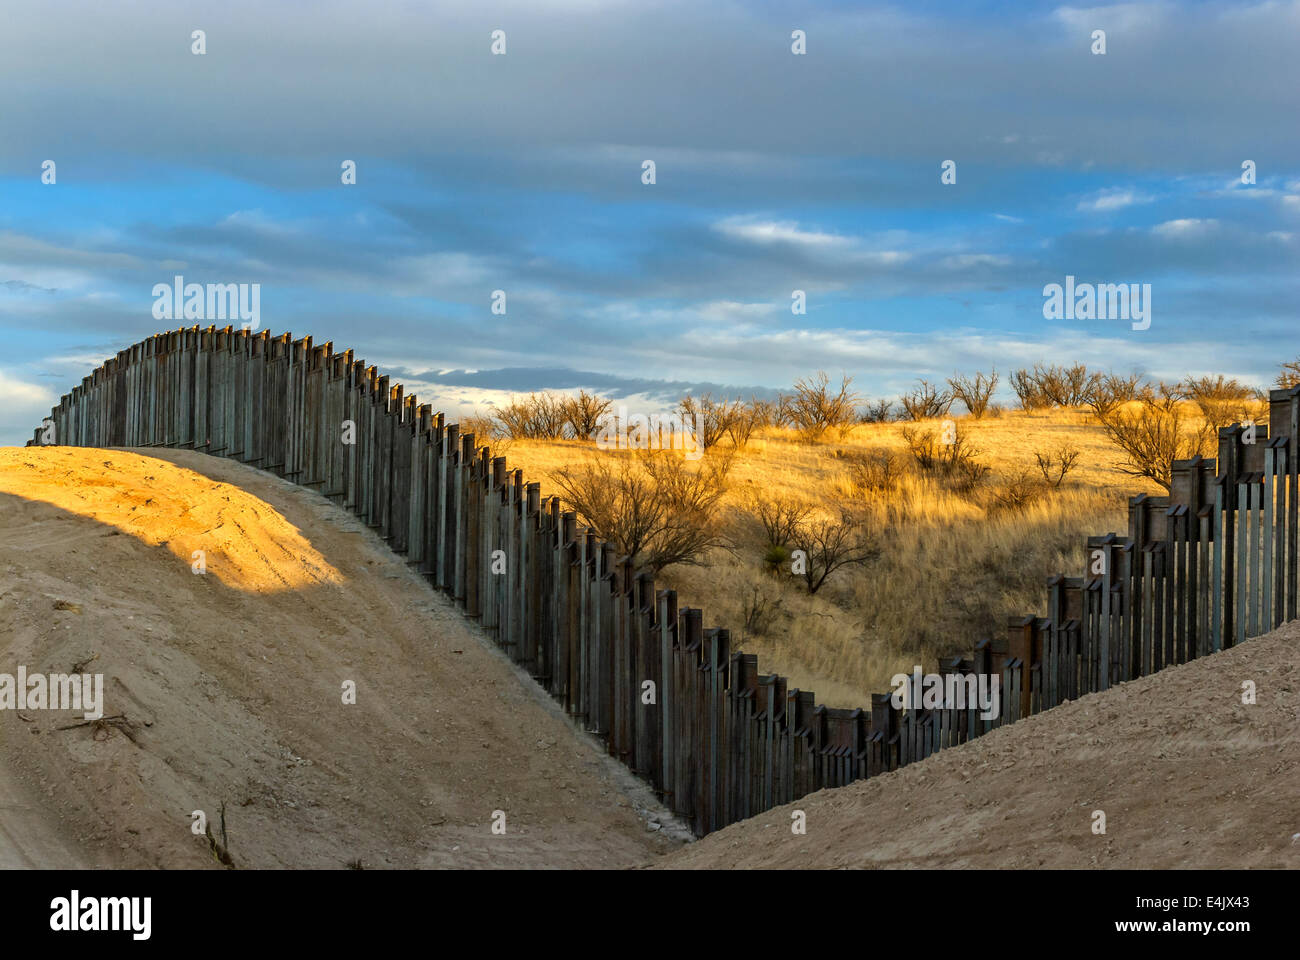 Massive US border fence on border with Mexico, about 6 miles east of Nogales Arizona, USA, viewed from US side at sunset. Stock Photo